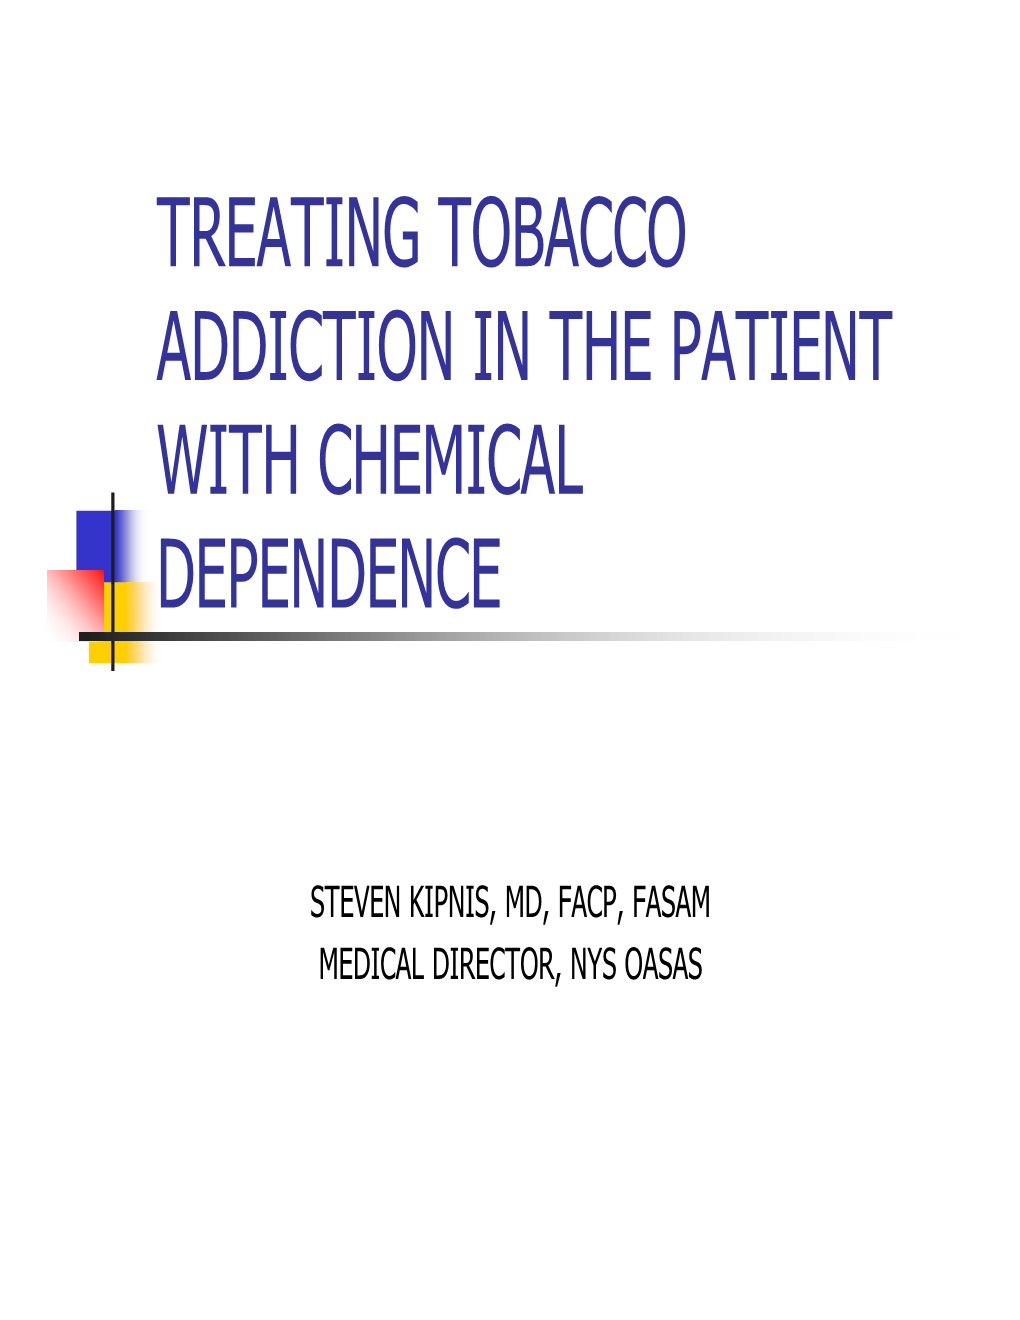 Treating Tobacco Addiction in the Patient with Chemical Dependence